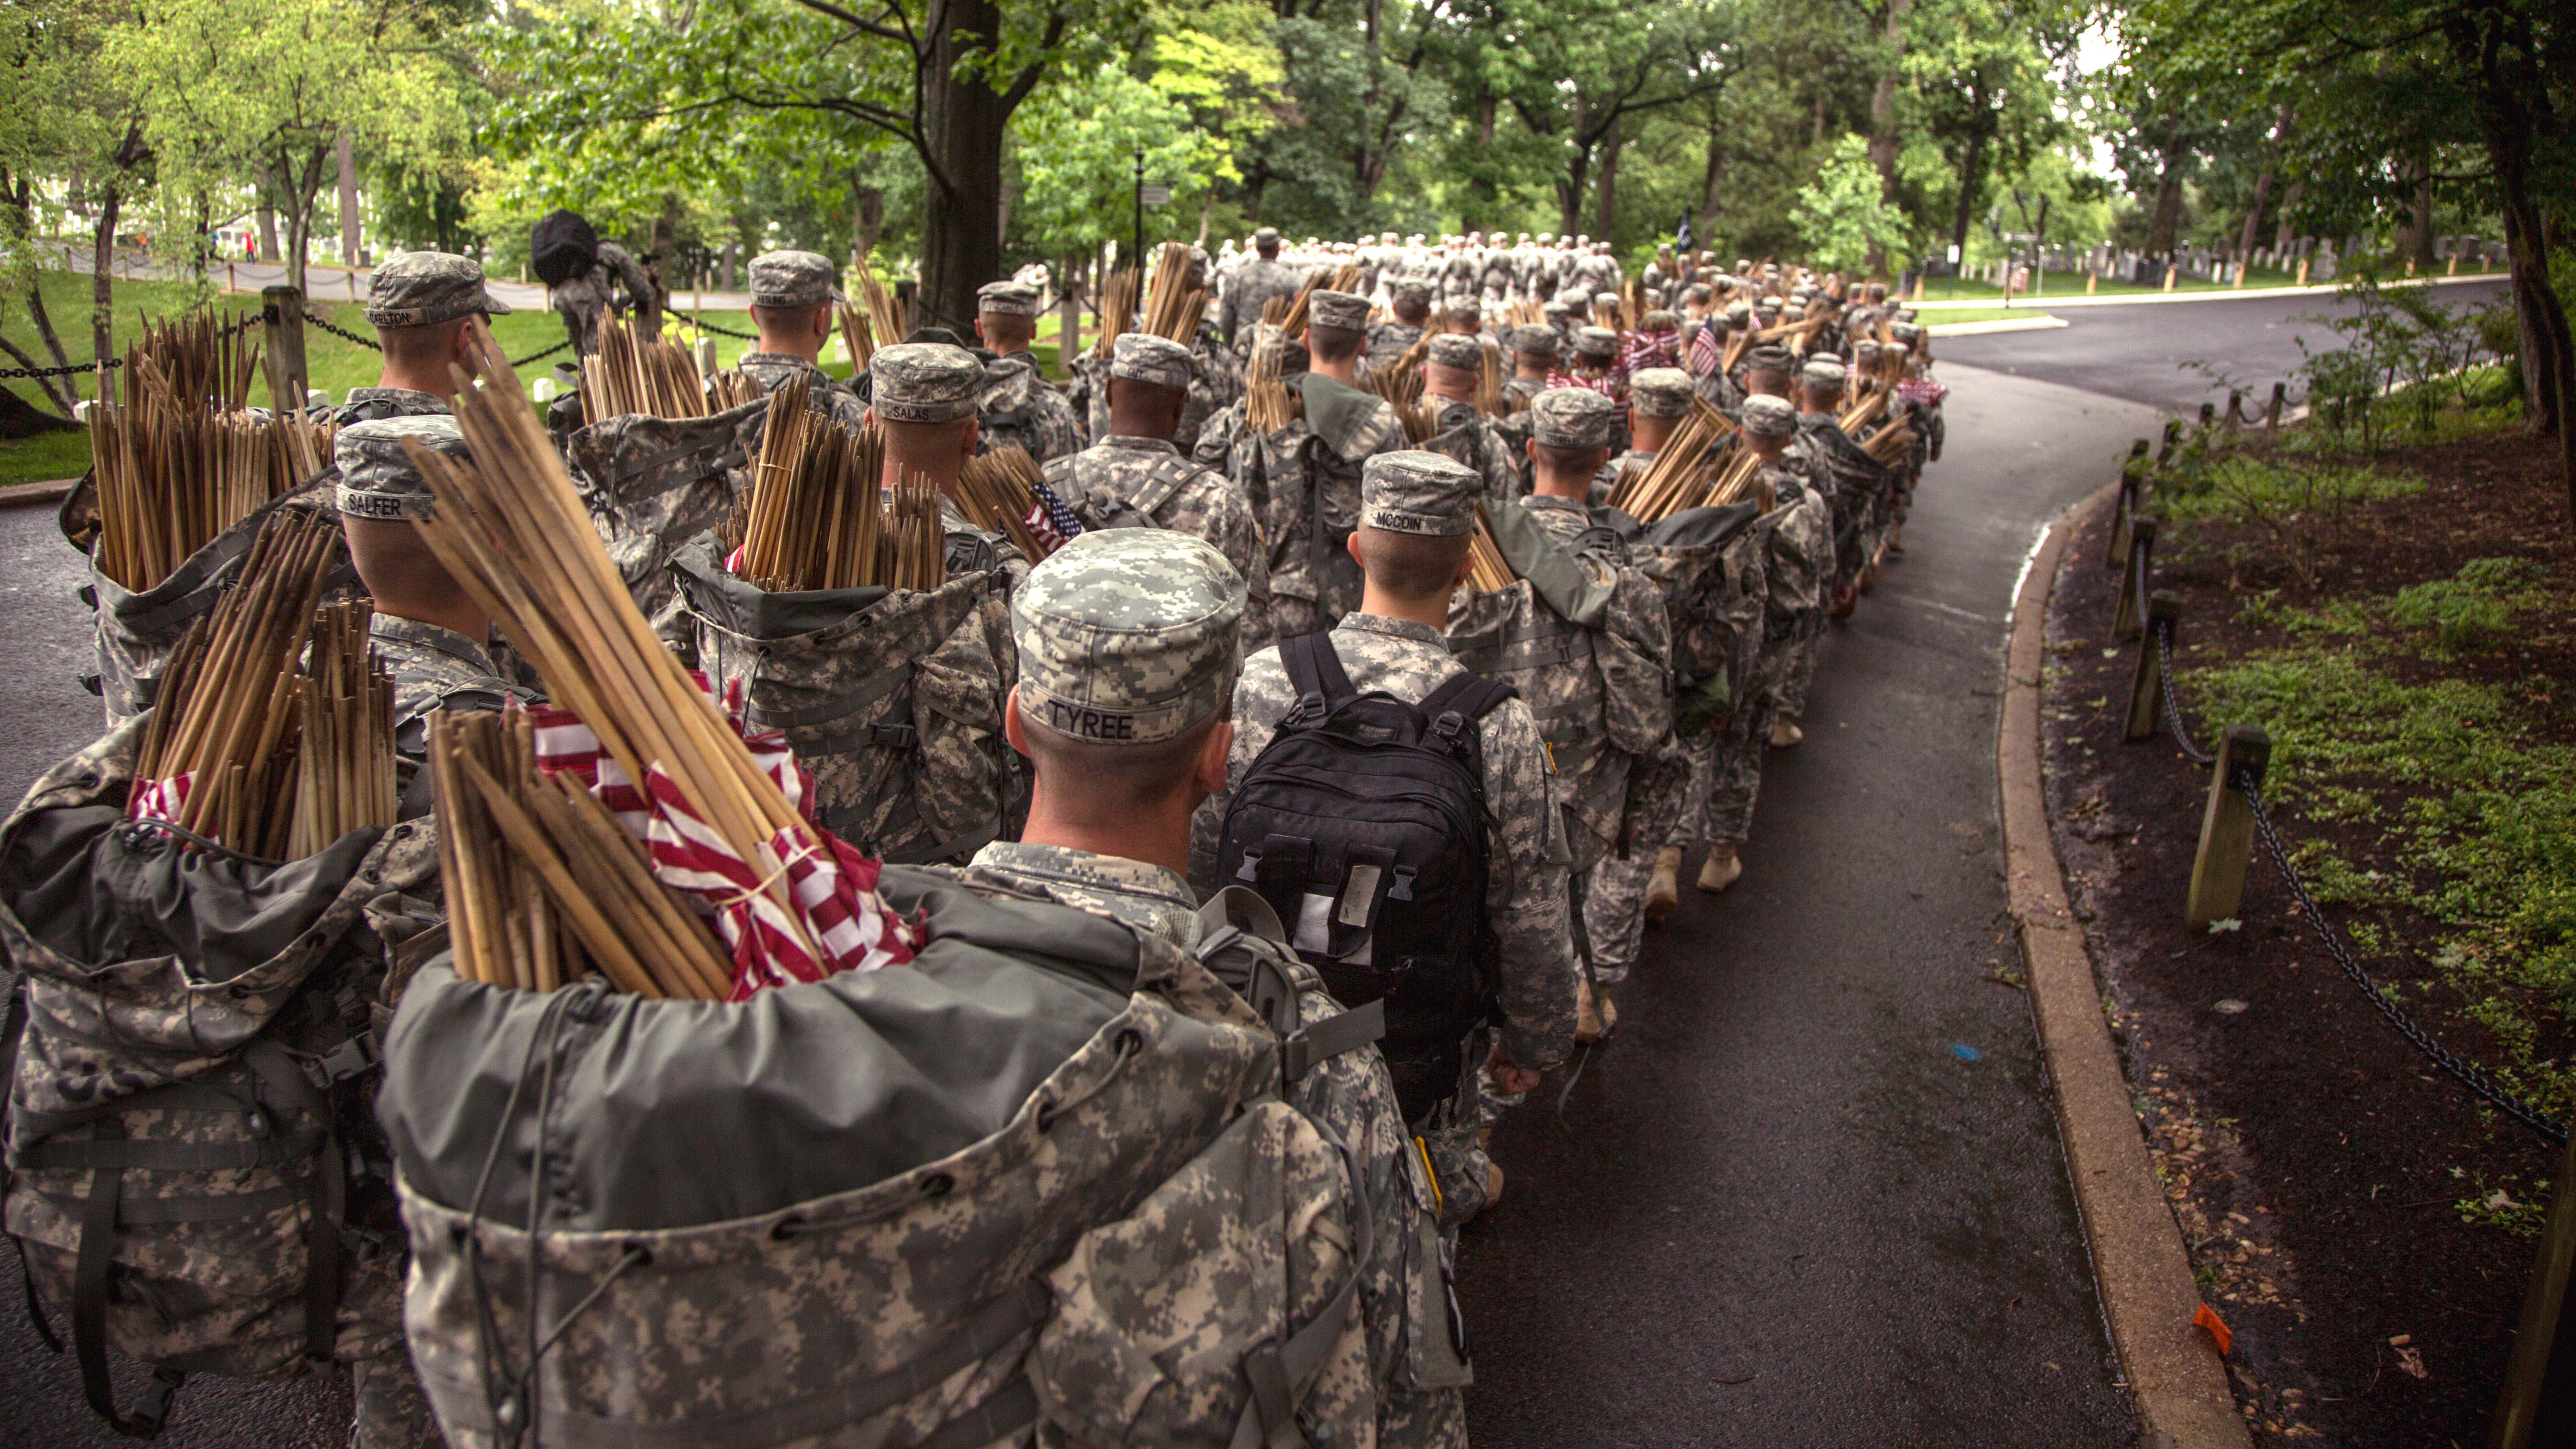 Carrying Bundles Of Small Amercian Flags In Backpacks Soldiers March Out To Their Assigned Sections During